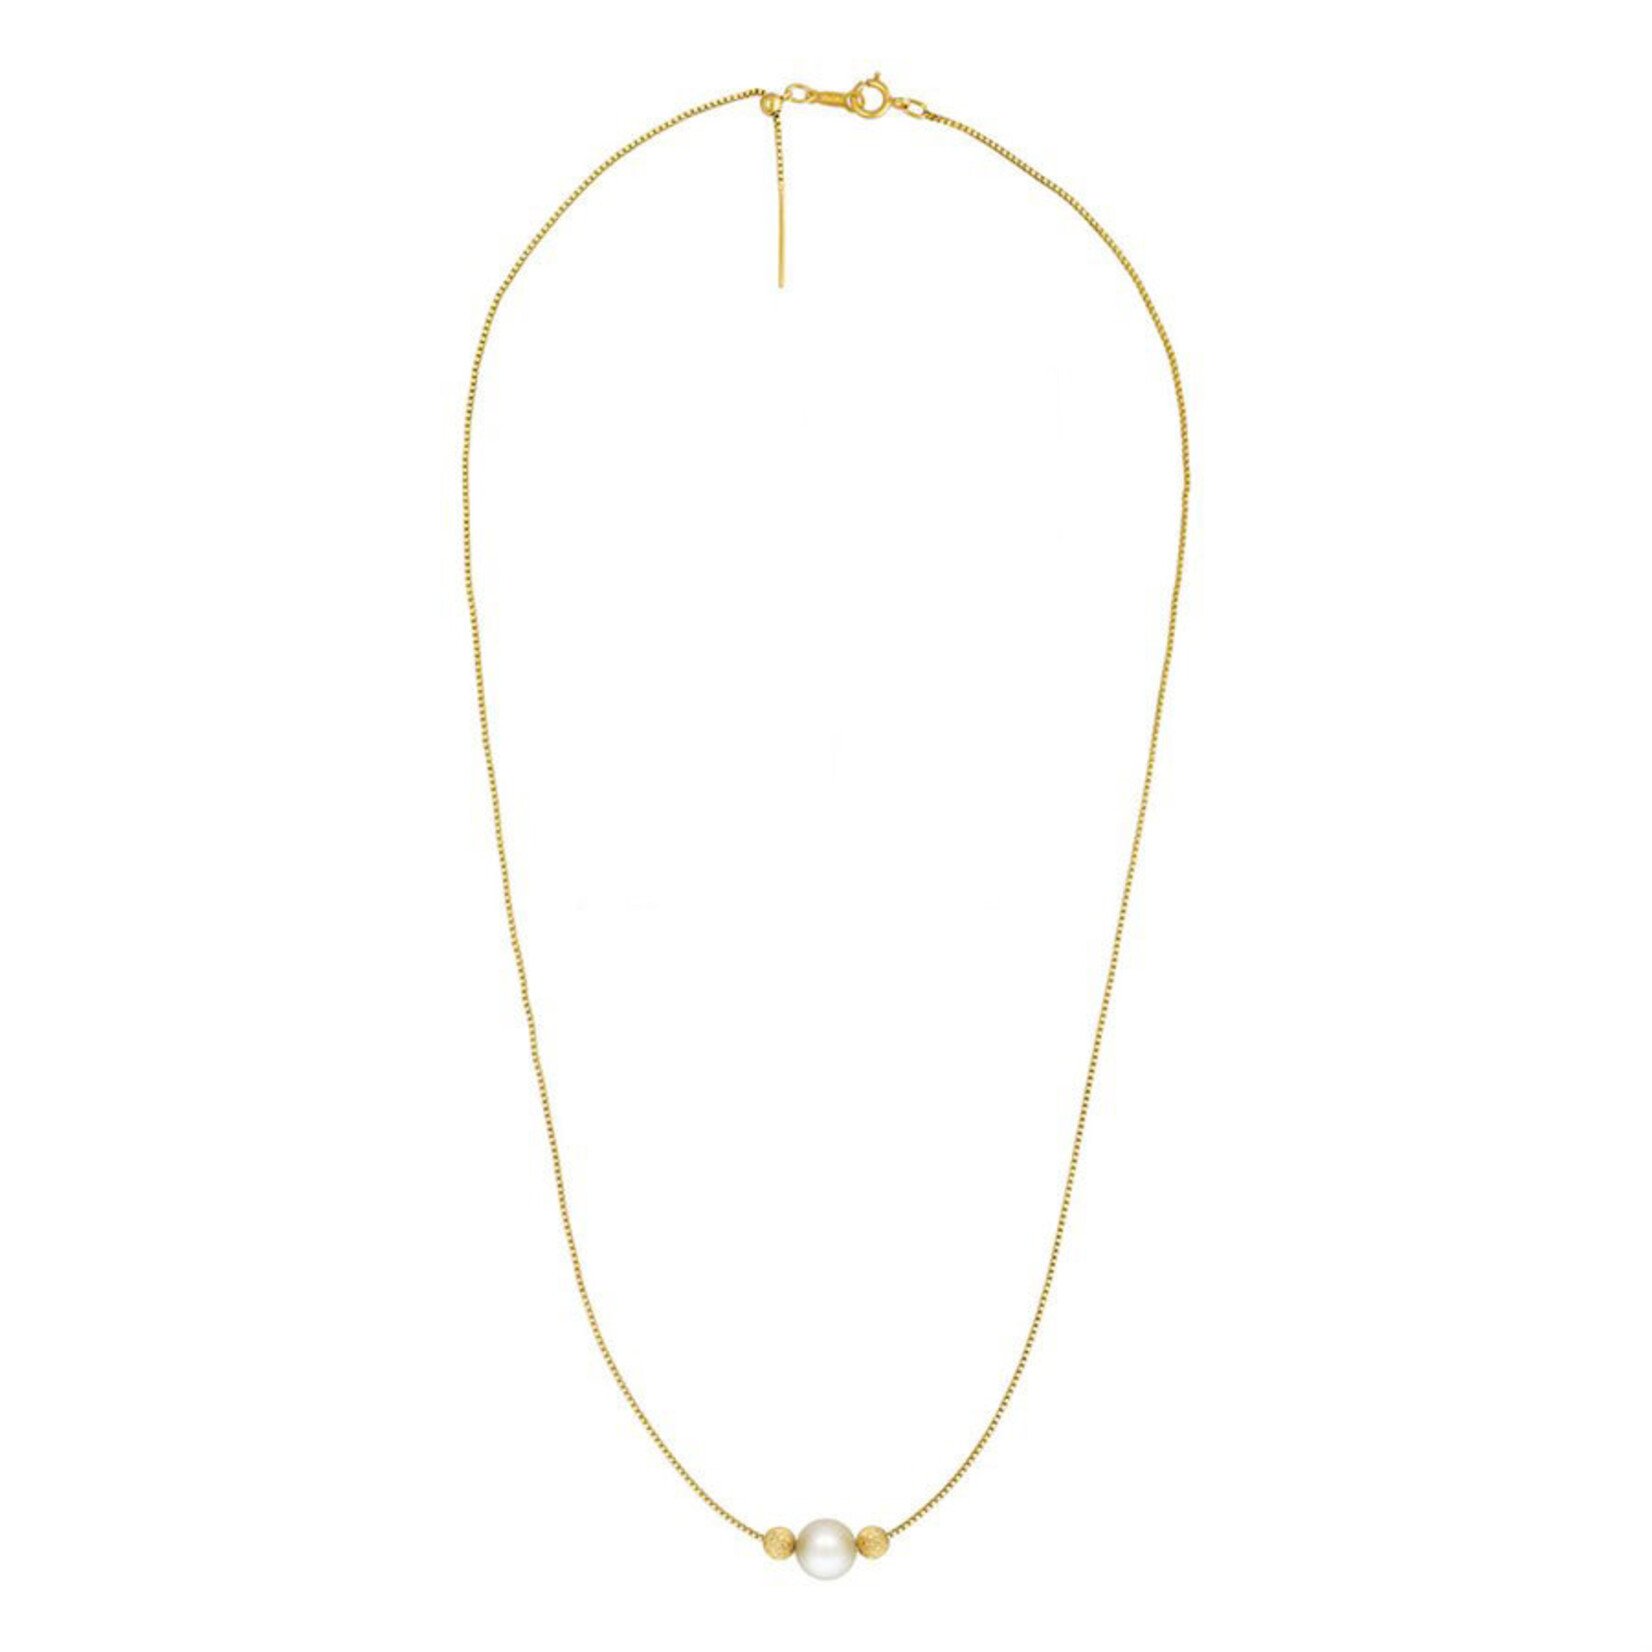 Gold Fill Adjustable Add-A-Bead Box Chain Necklace